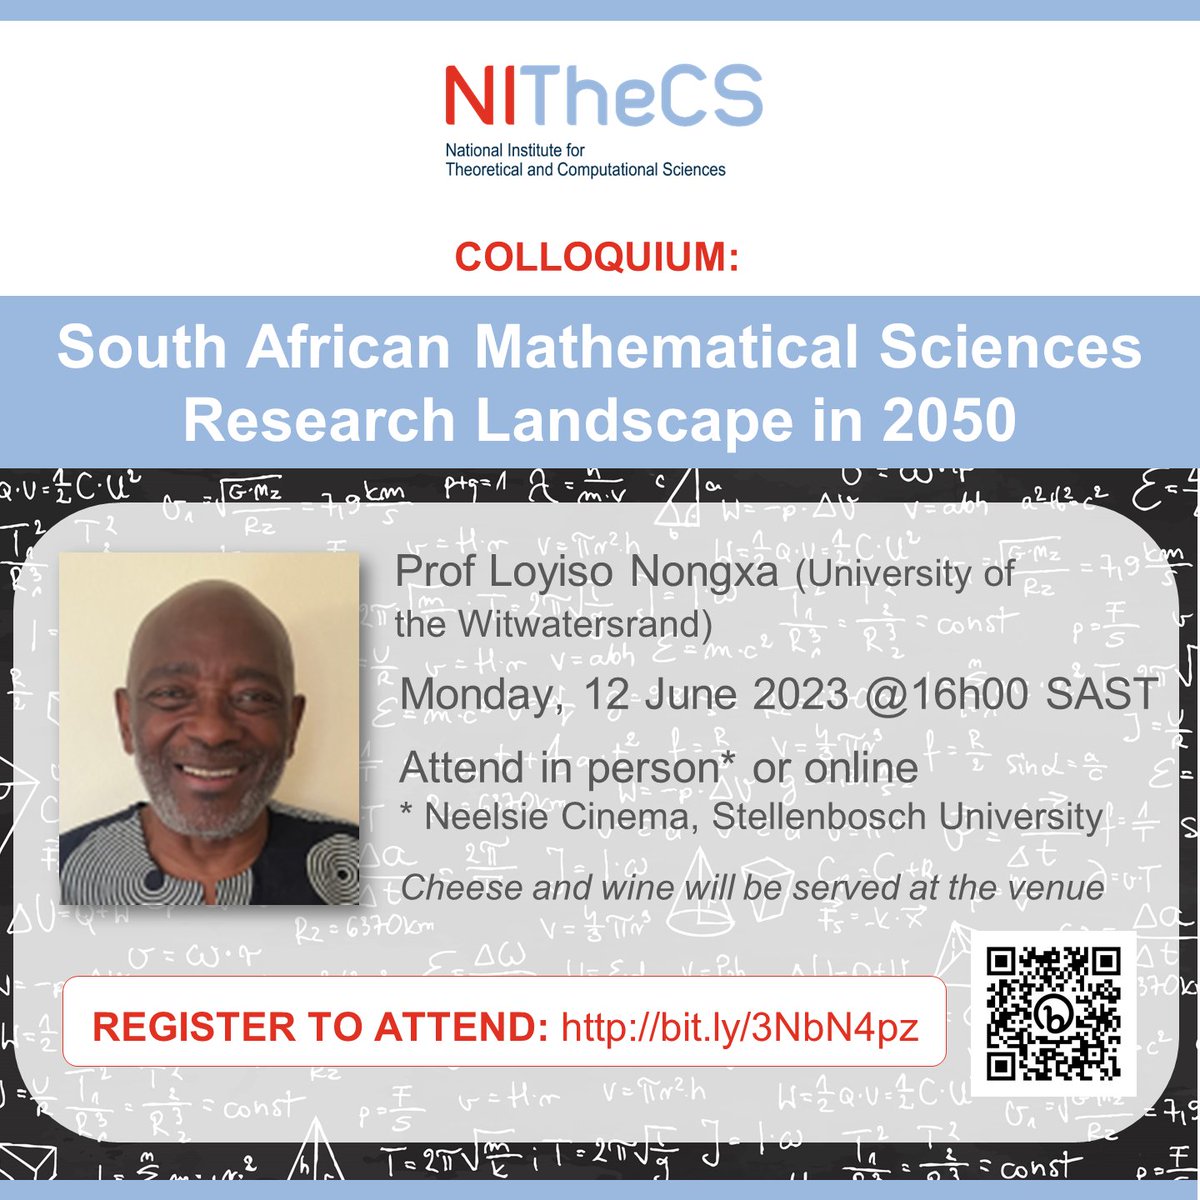 NITheCS Colloquium: 'South African Mathematical Sciences Research Landscape in 2050' by Prof Loyiso Nongxa (WITS) - Mon, 12 Jun 2023 @16h00 SAST. Attend at the Neelsie Cinema, Stellenbosch University, or online. mailchi.mp/nithecs/loyiso… #mathematics #research #2024 #nithecs